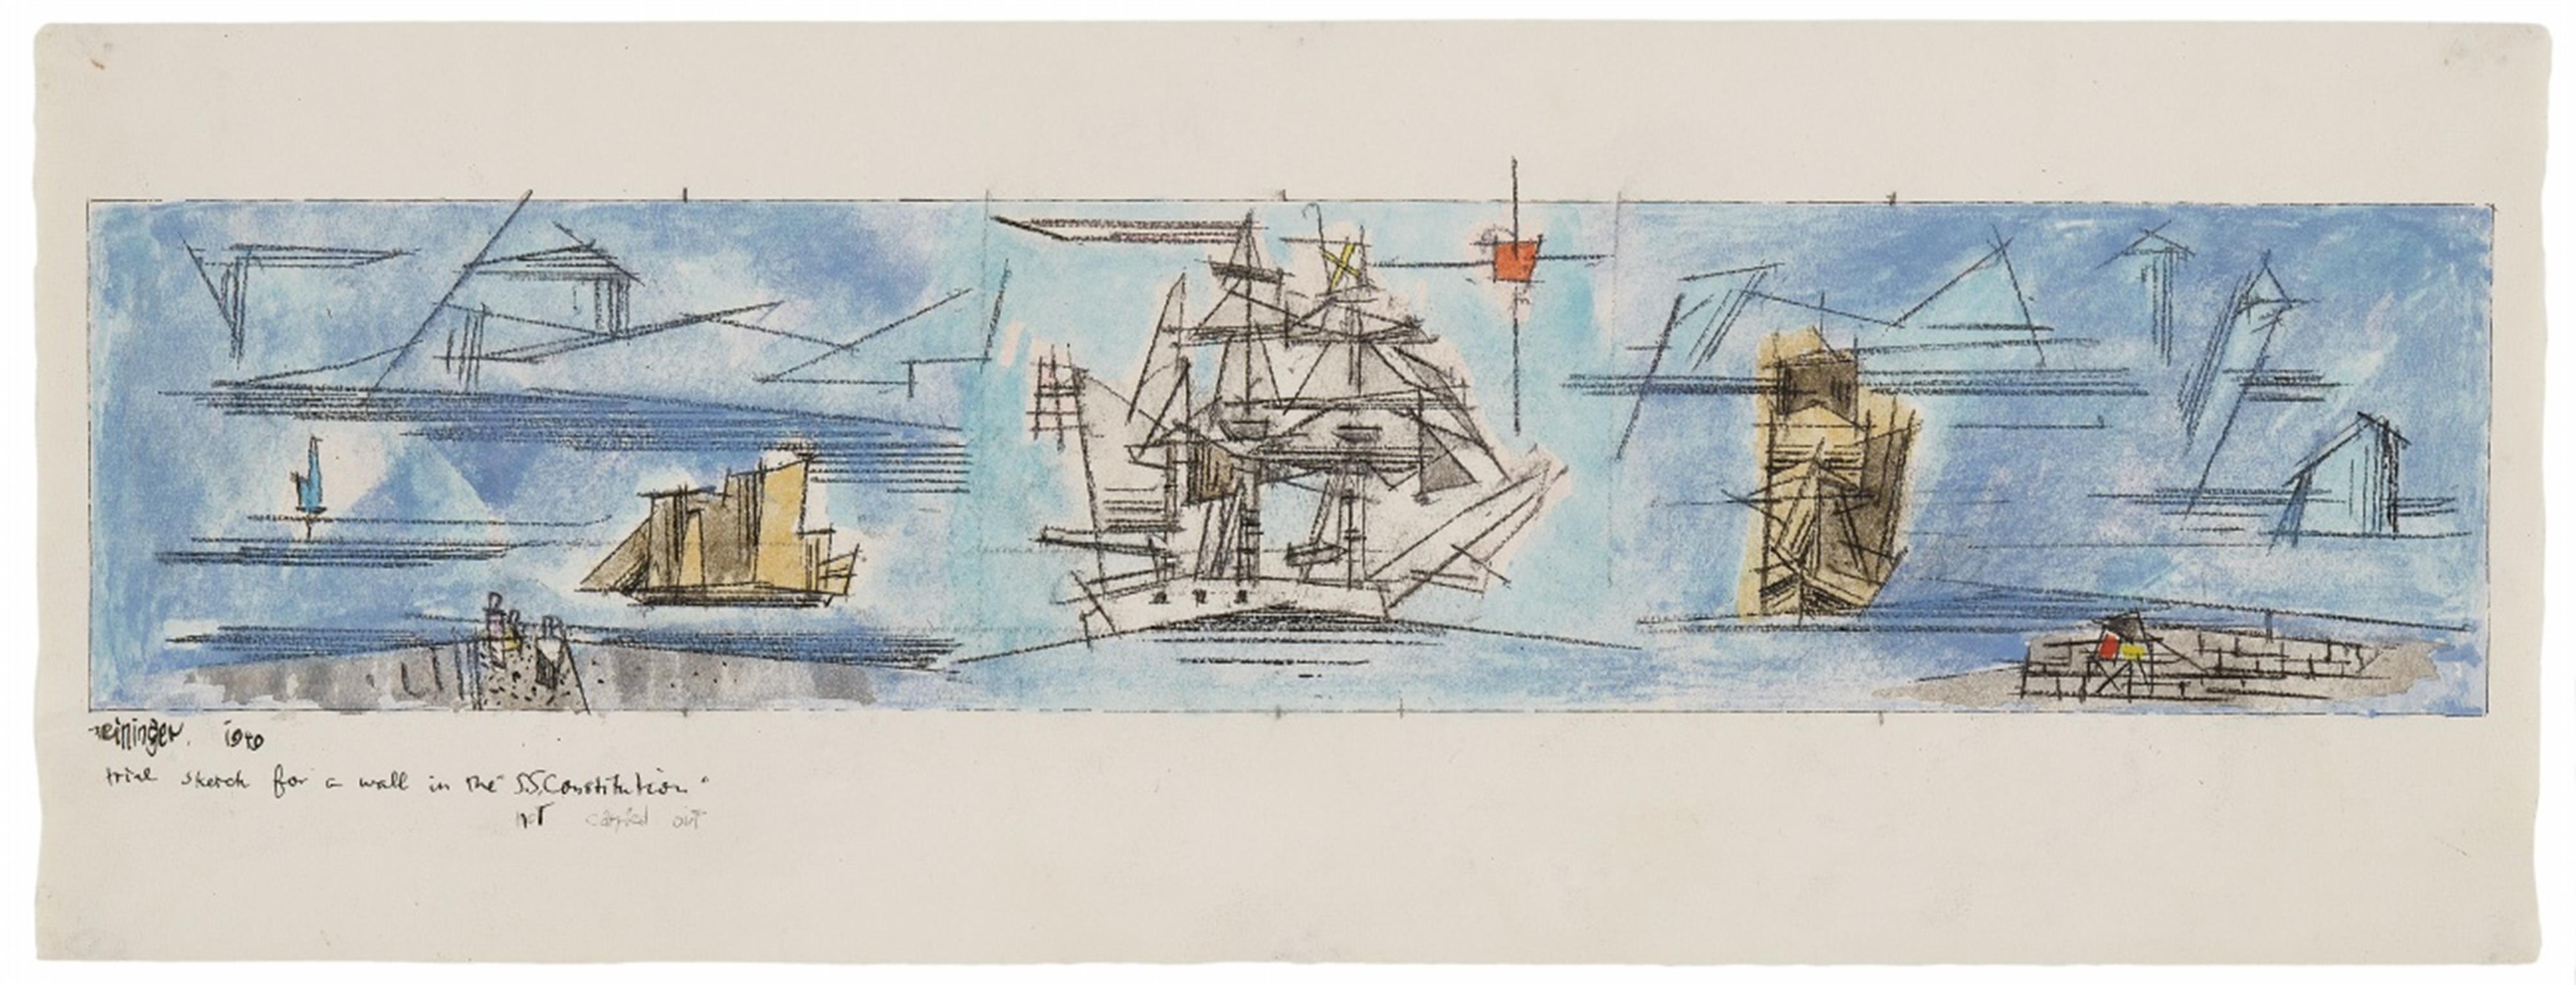 Lyonel Feininger - Trial Sketch for a wall in the "SS Constitution" - image-1